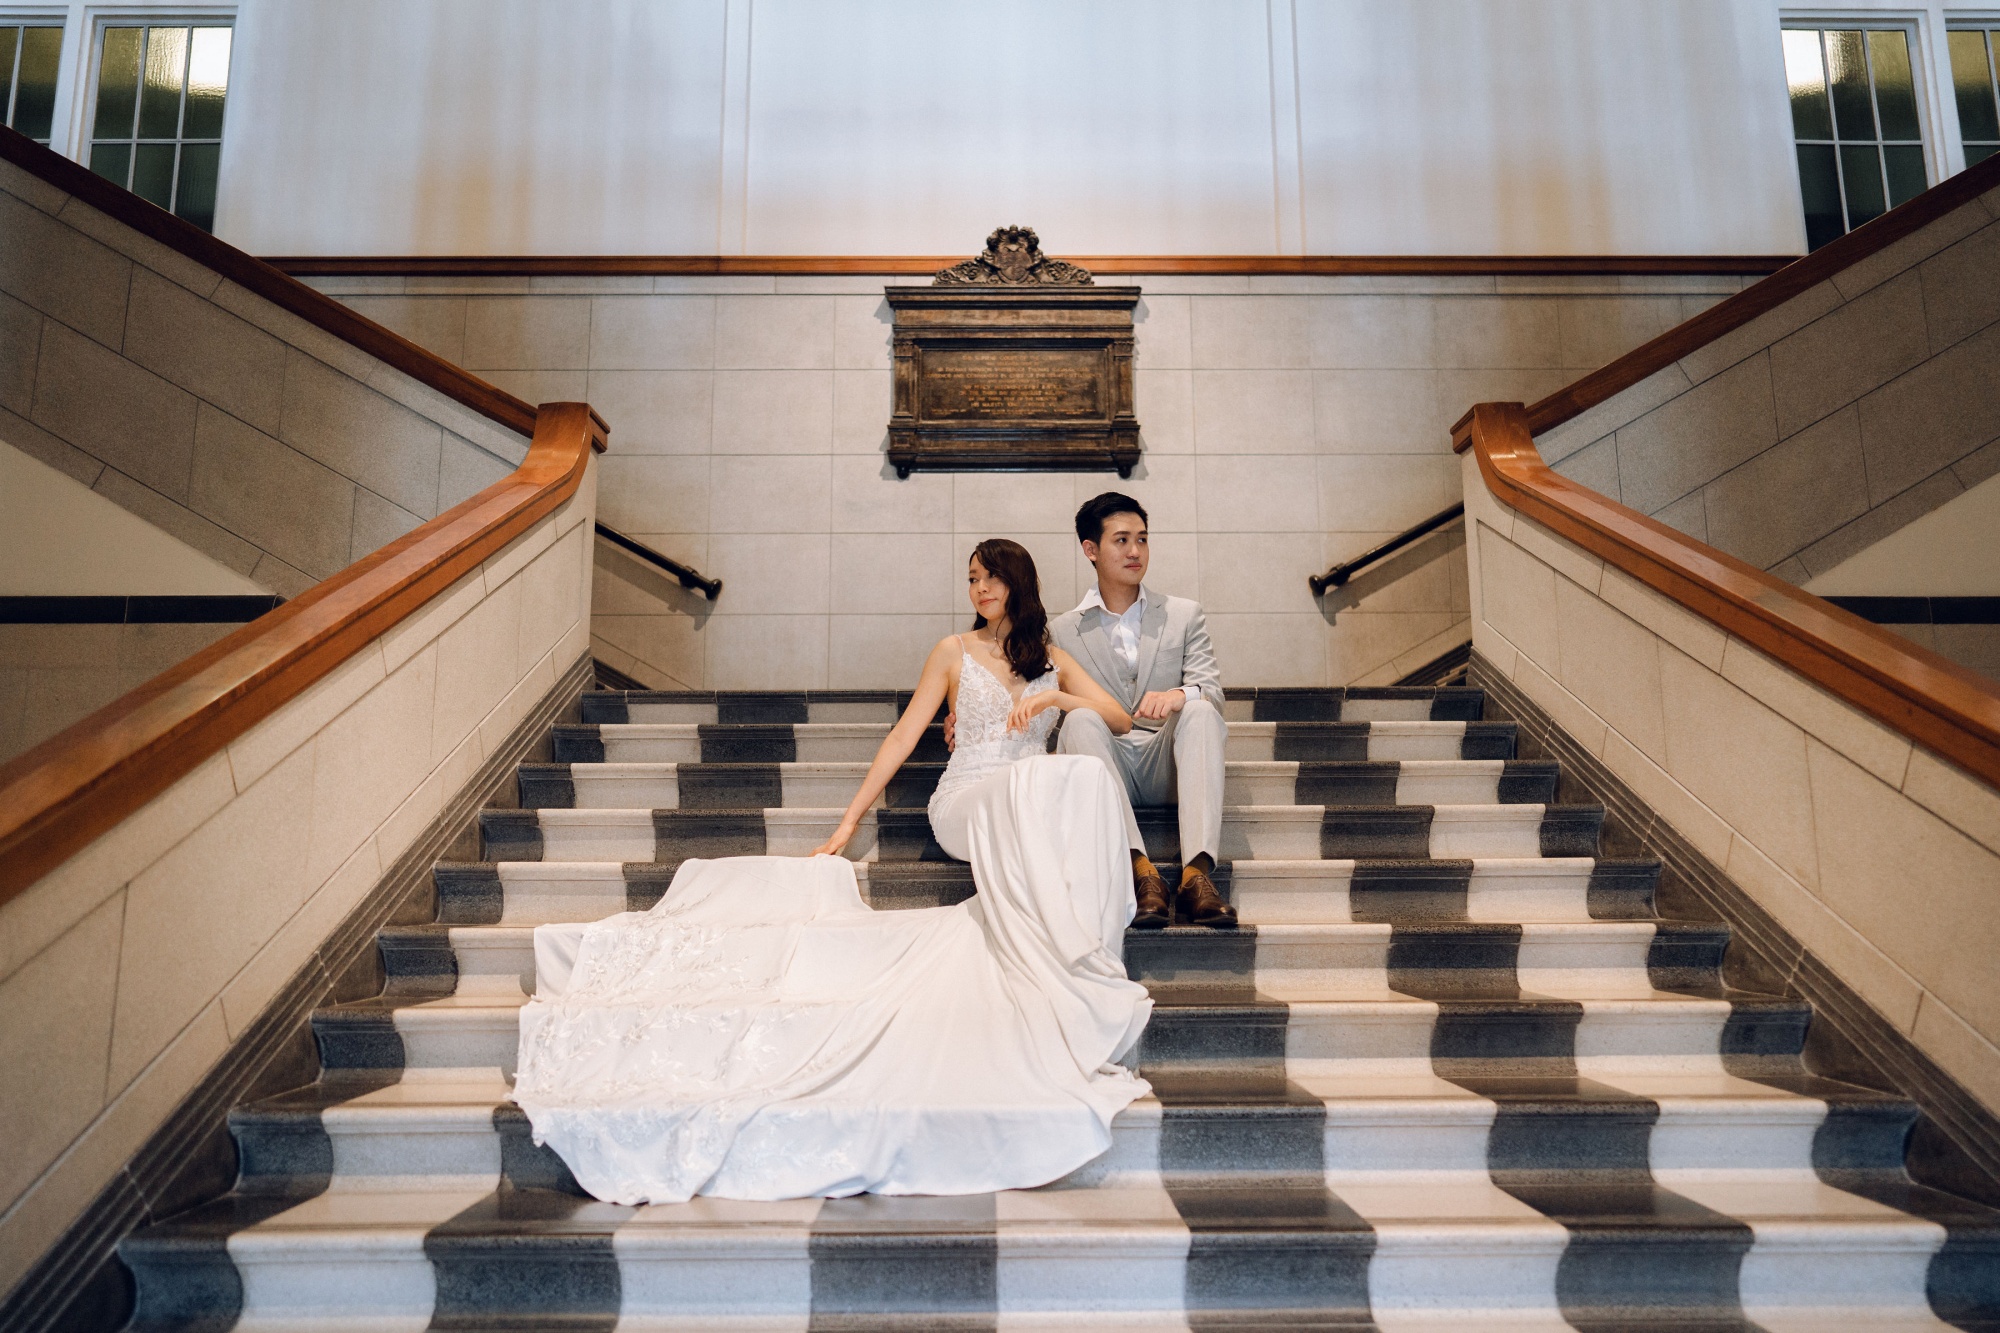 Prewedding Photoshoot At National Gallery And Armenian Street Carpet Shop by Samantha on OneThreeOneFour 22